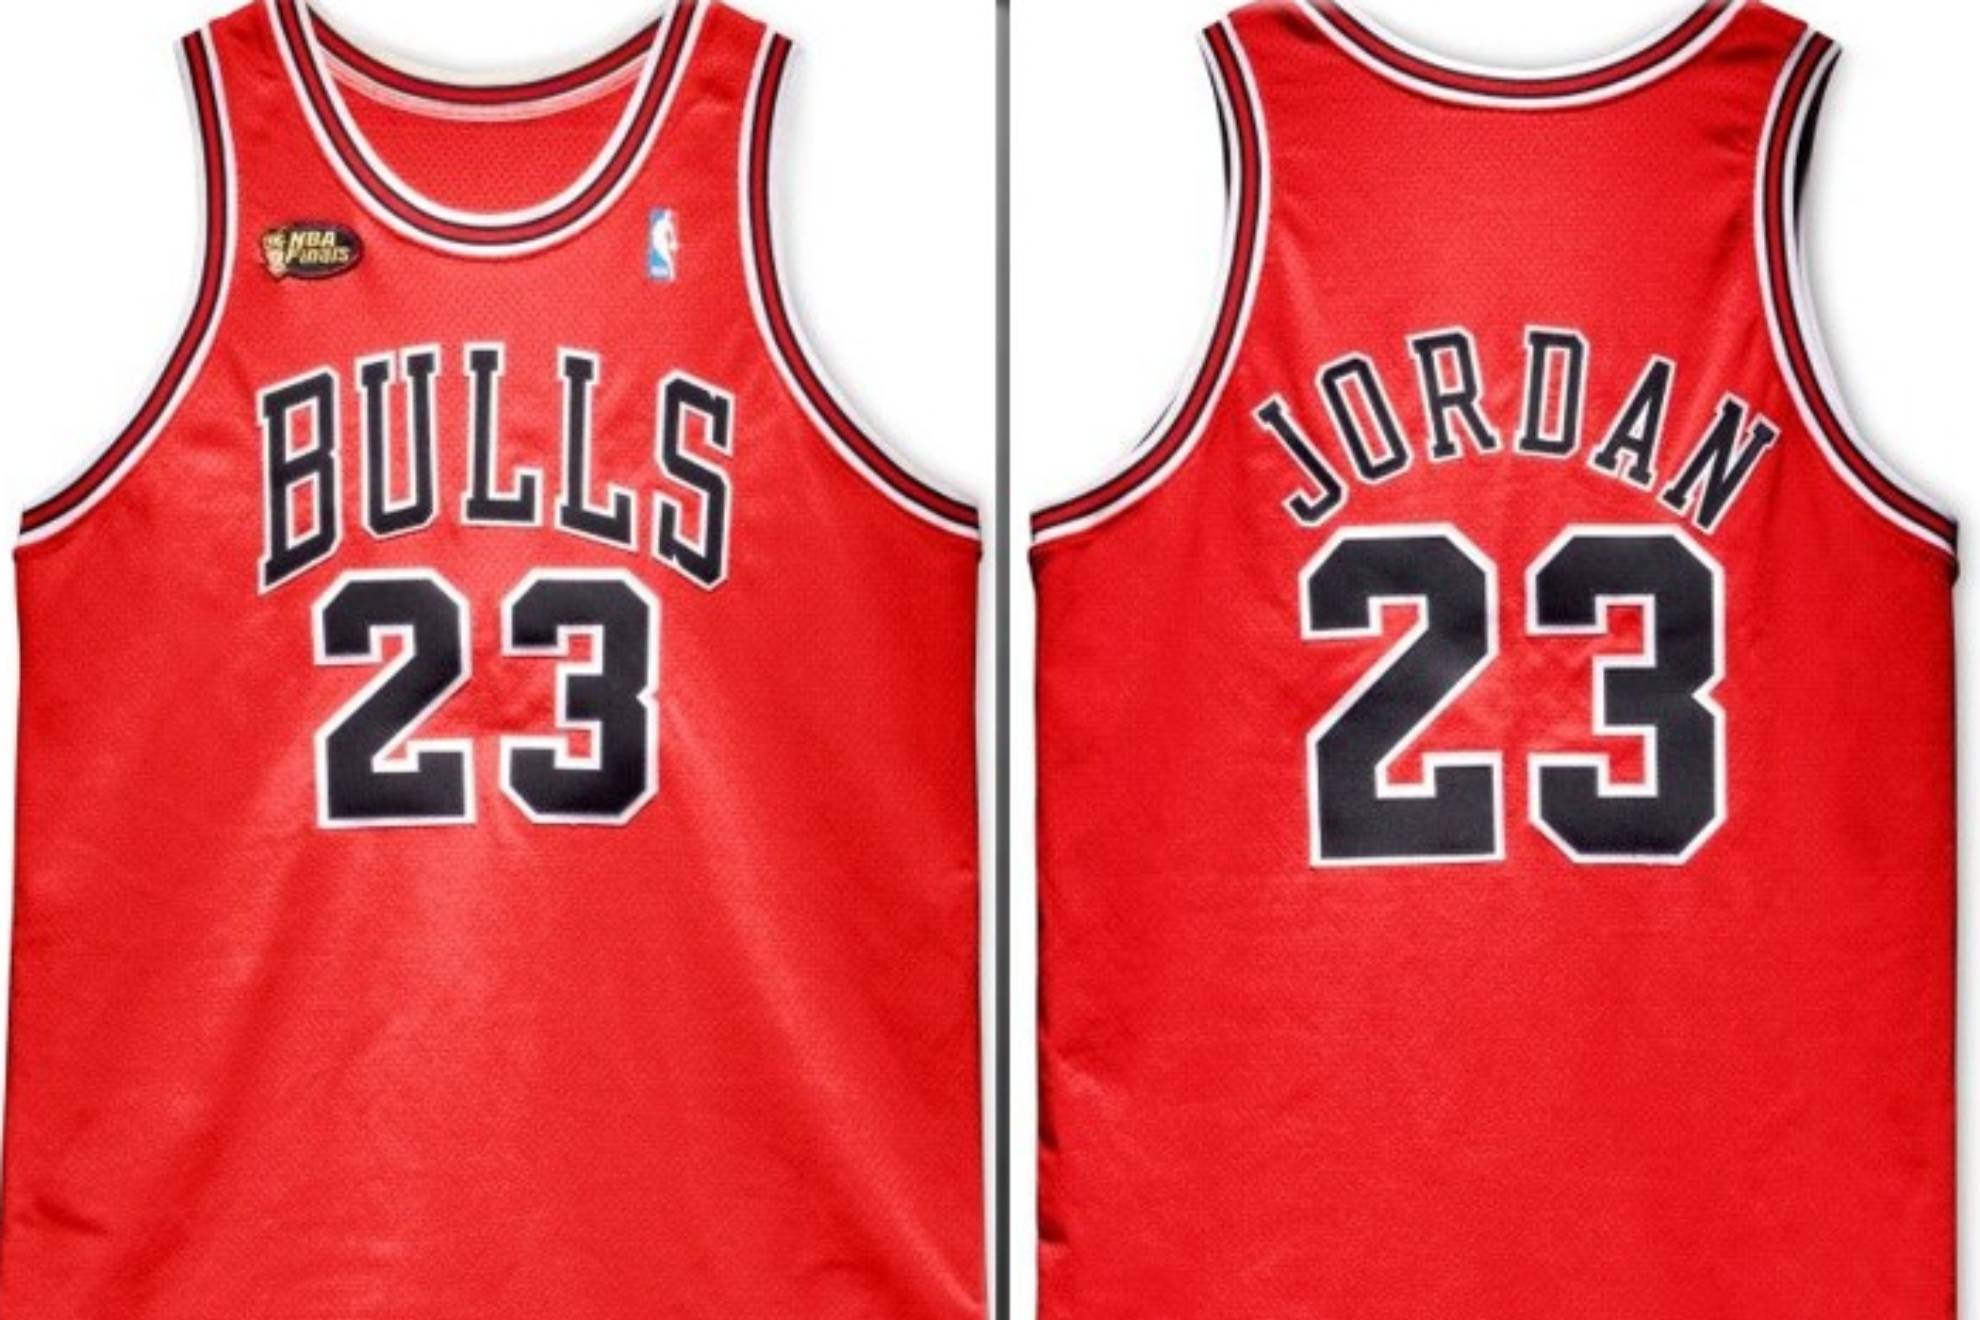 Michael Jordan's jersey sells for 10.1 million dollars: The most expensive jerseys in sporting history